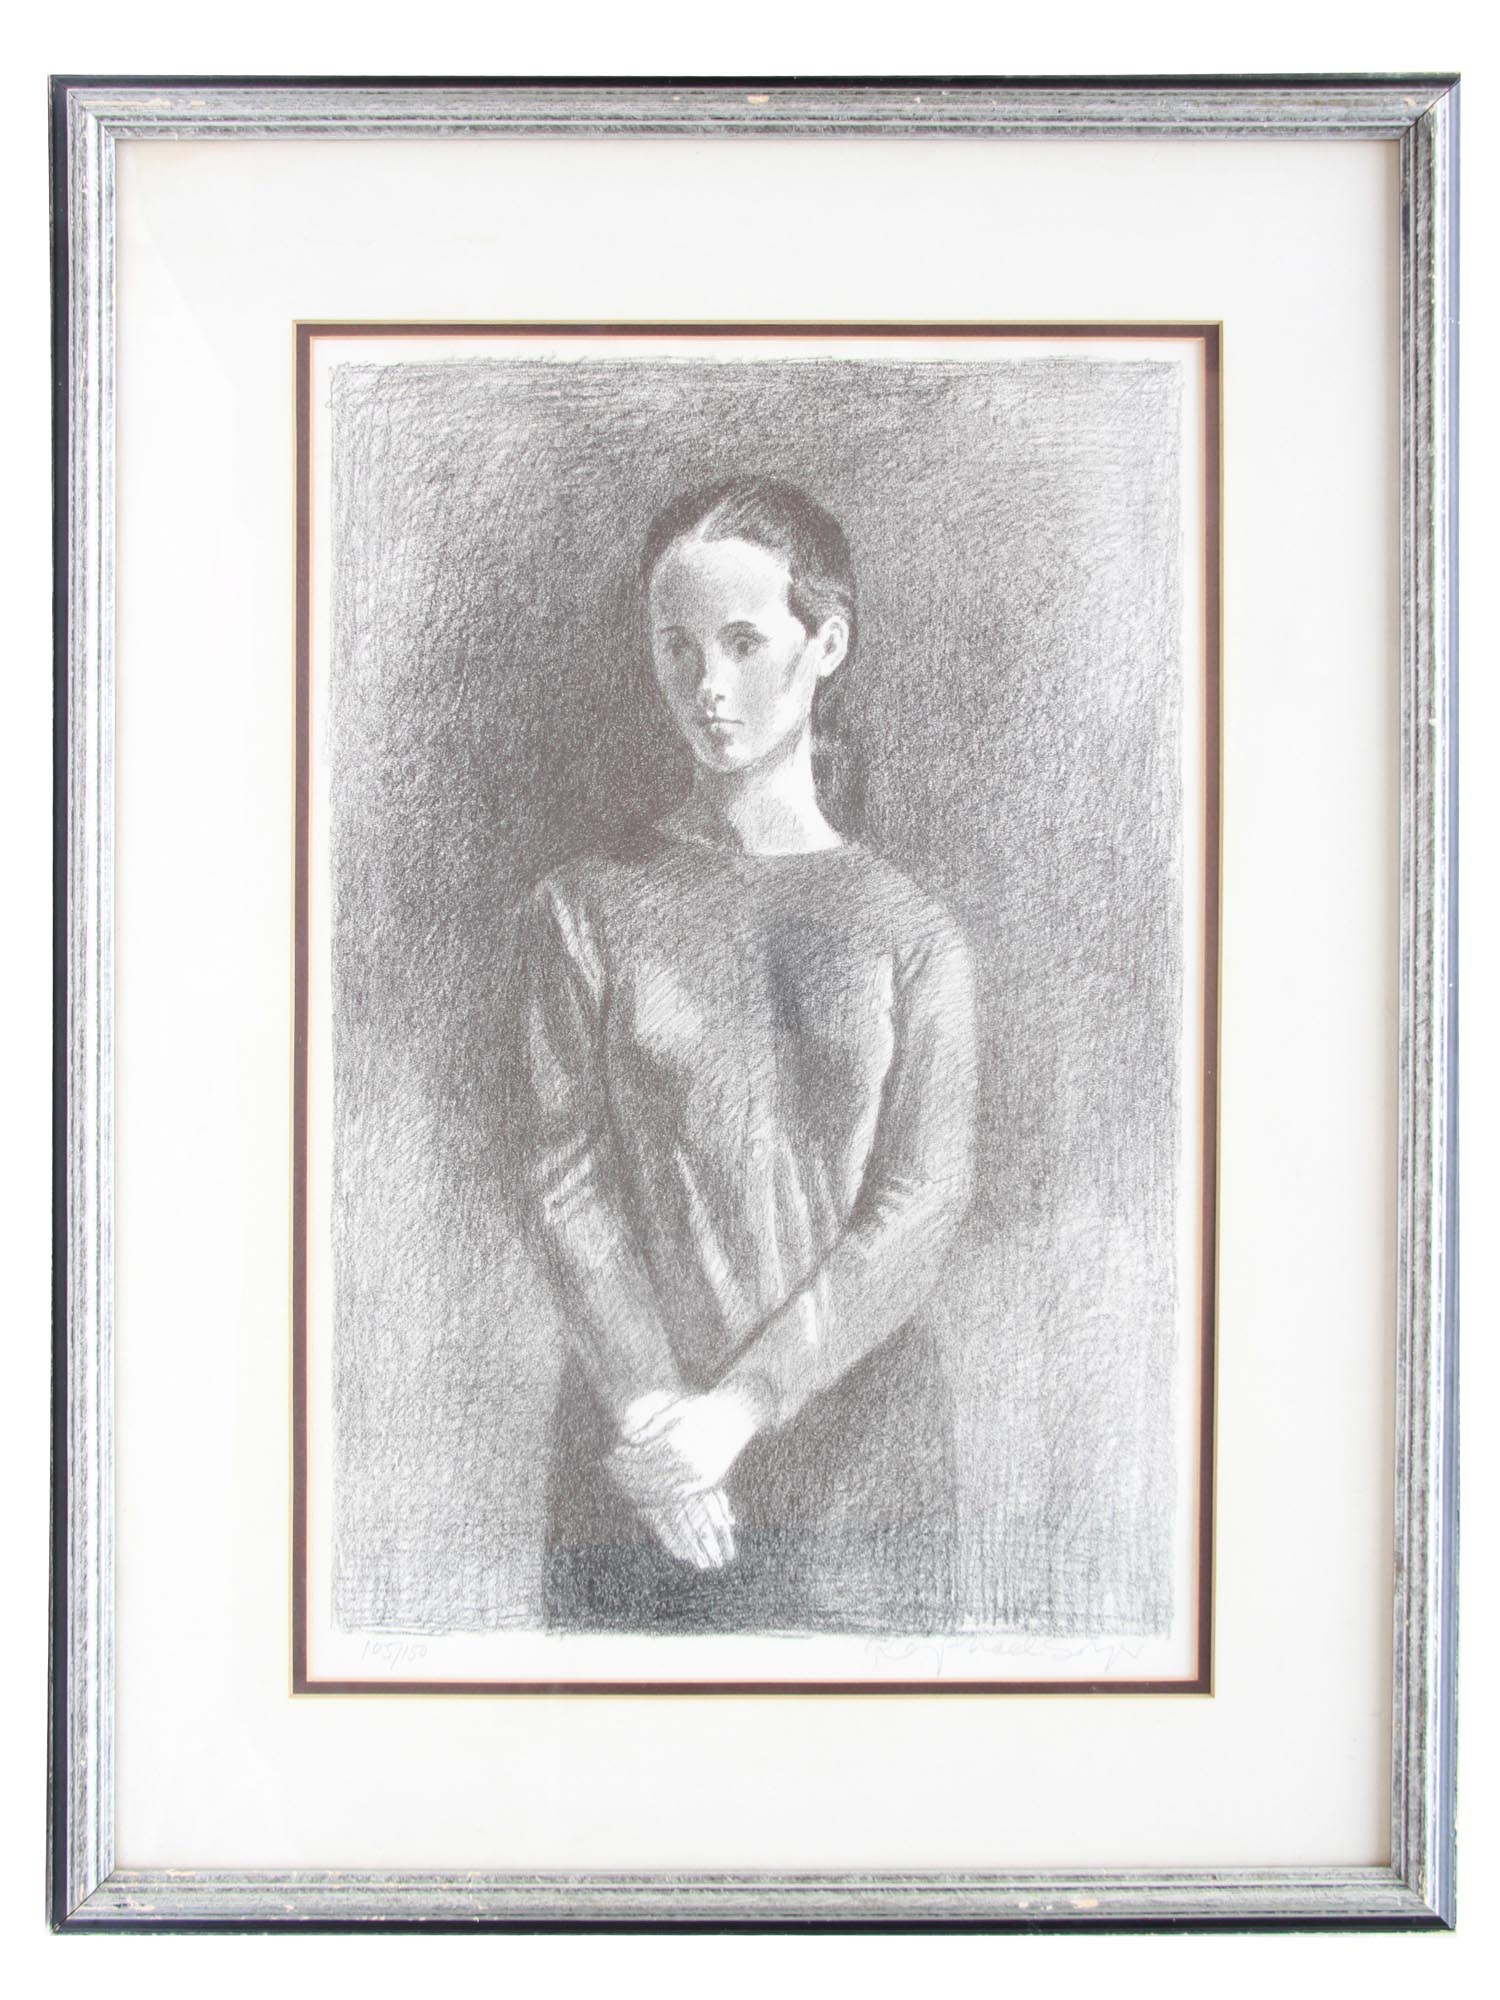 AMERICAN ETCHING GIRL PORTRAIT BY RAPHAEL SOYER PIC-0